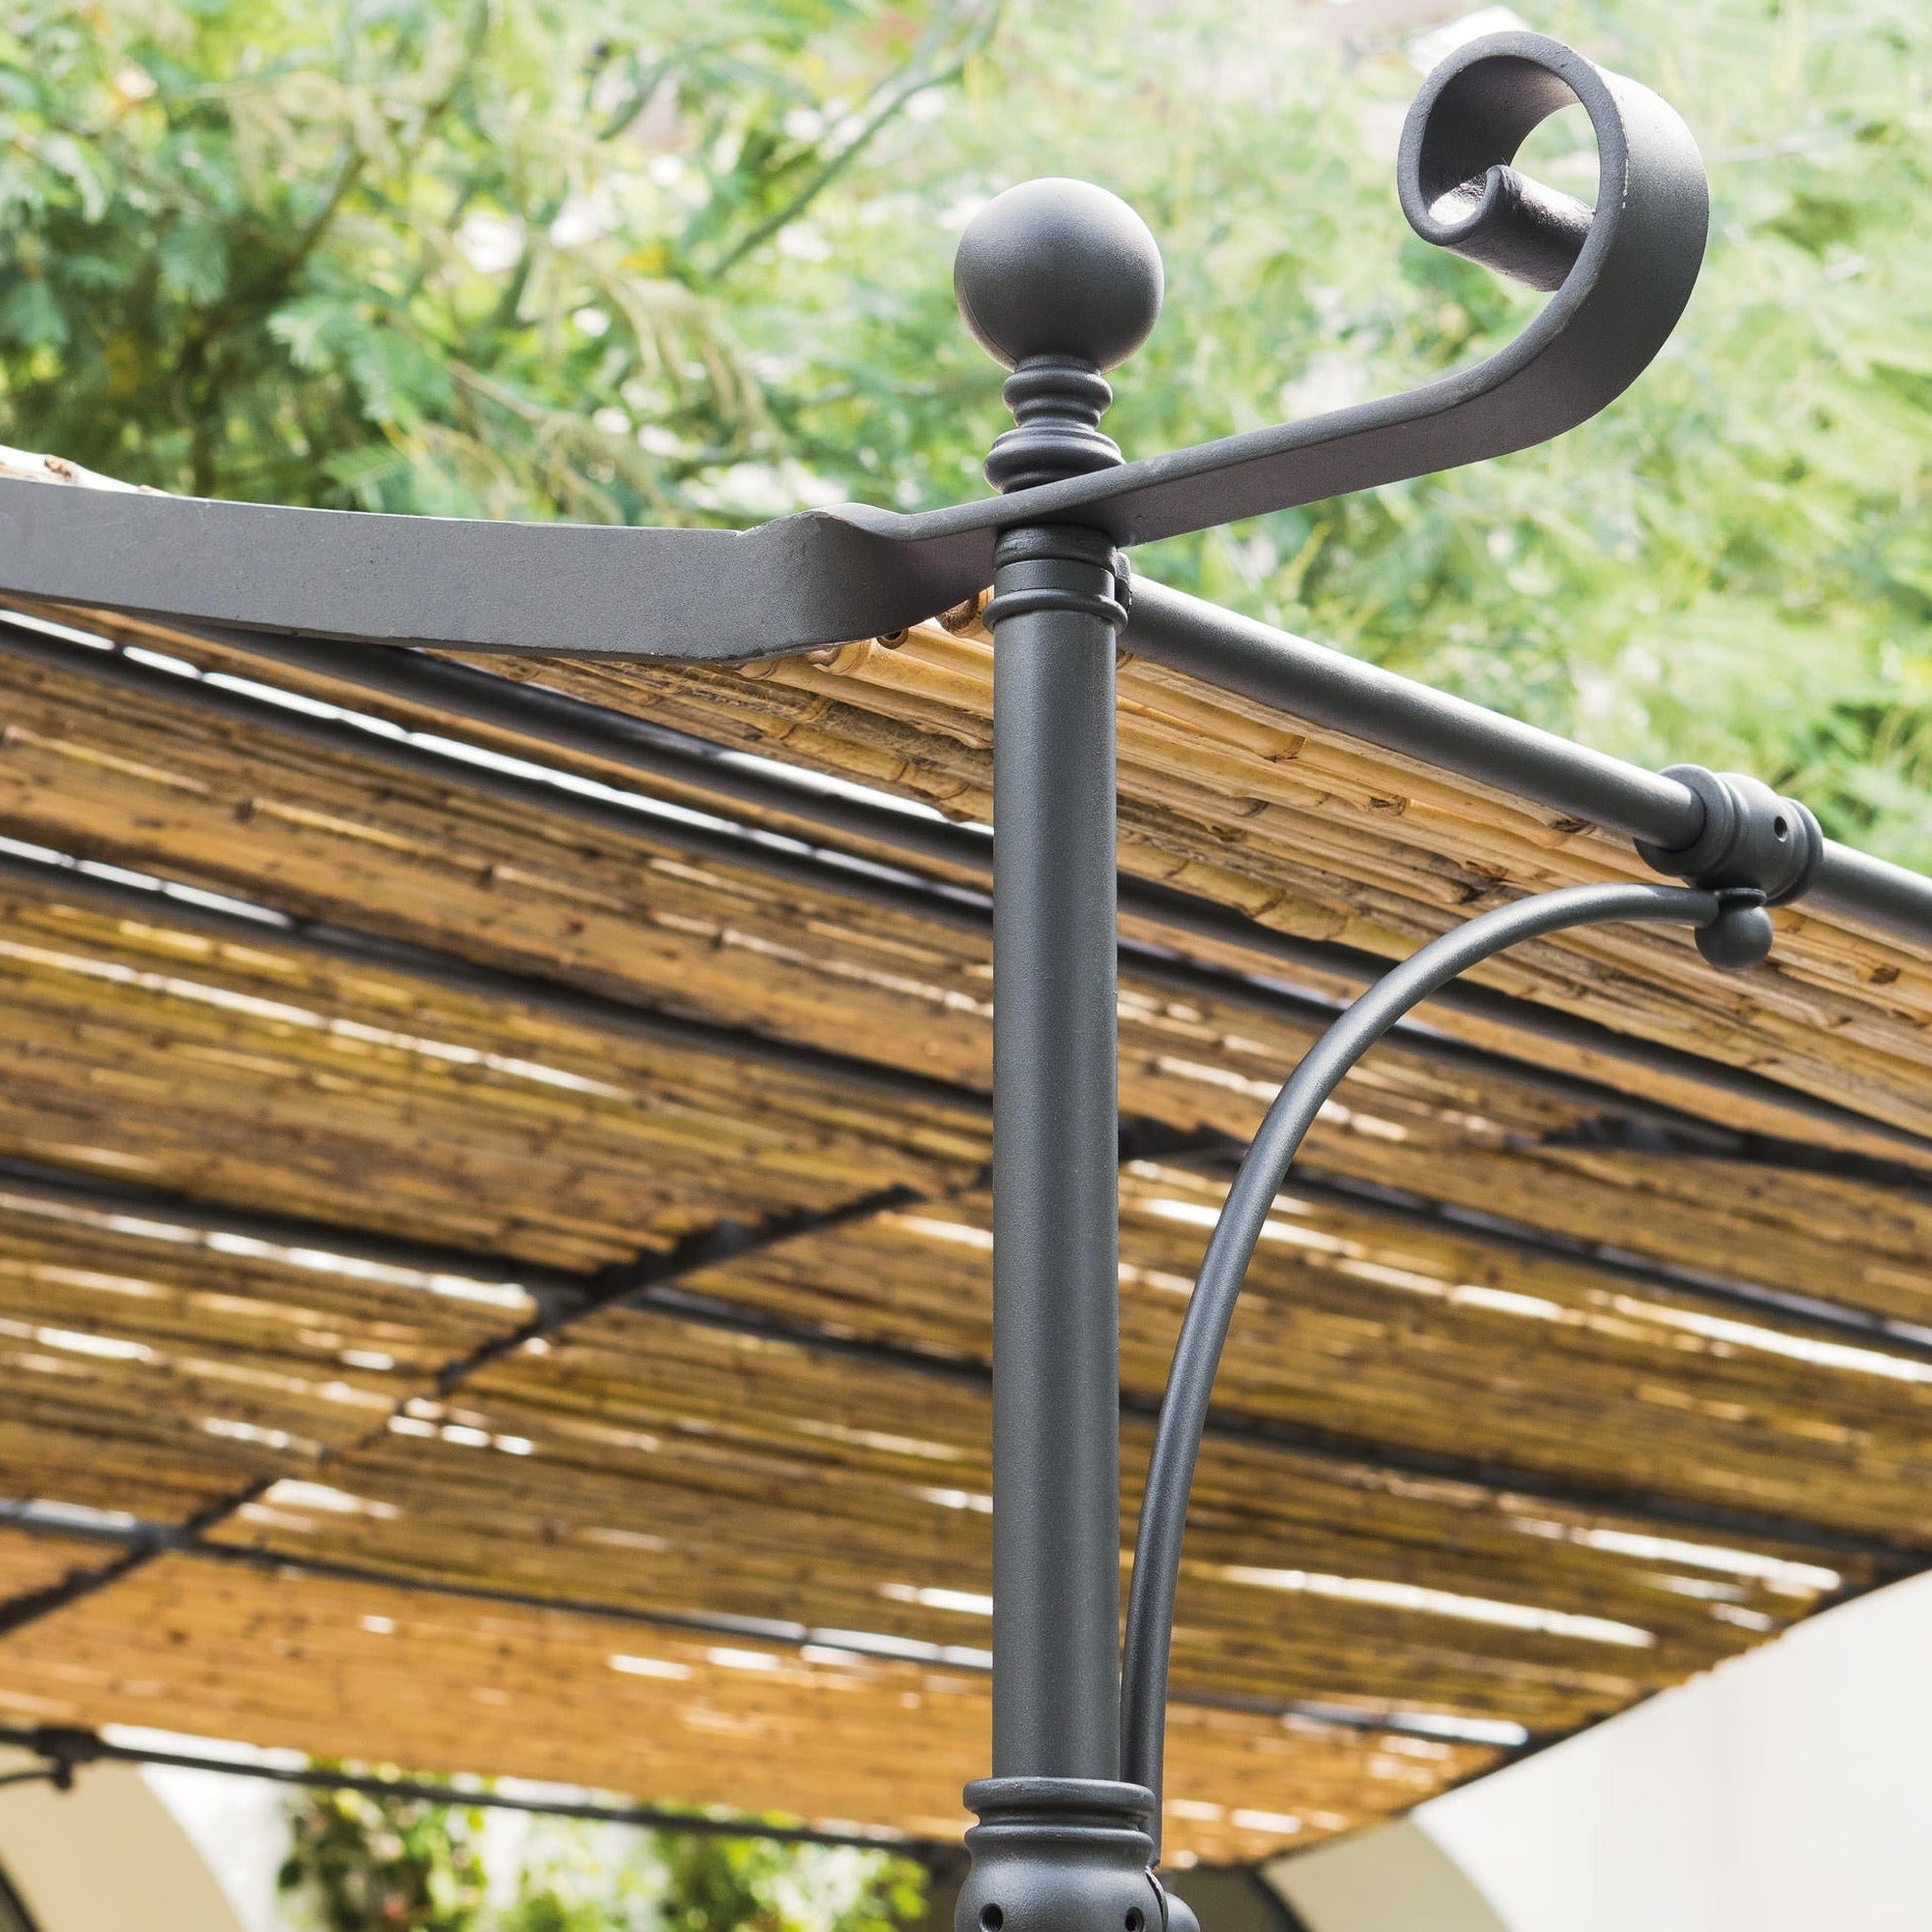 The Unopiu bamboo mat set for curved free-standing pergola Solaire is the perfect solution to protect your terrace or garden from the sun and prying eyes. The set consists of high-quality bamboo rods with variable cutting diameter from 1 cm to about 2 cm, which are connected with stainless steel wire. This not only ensures high stability, but also a long service life of the product.